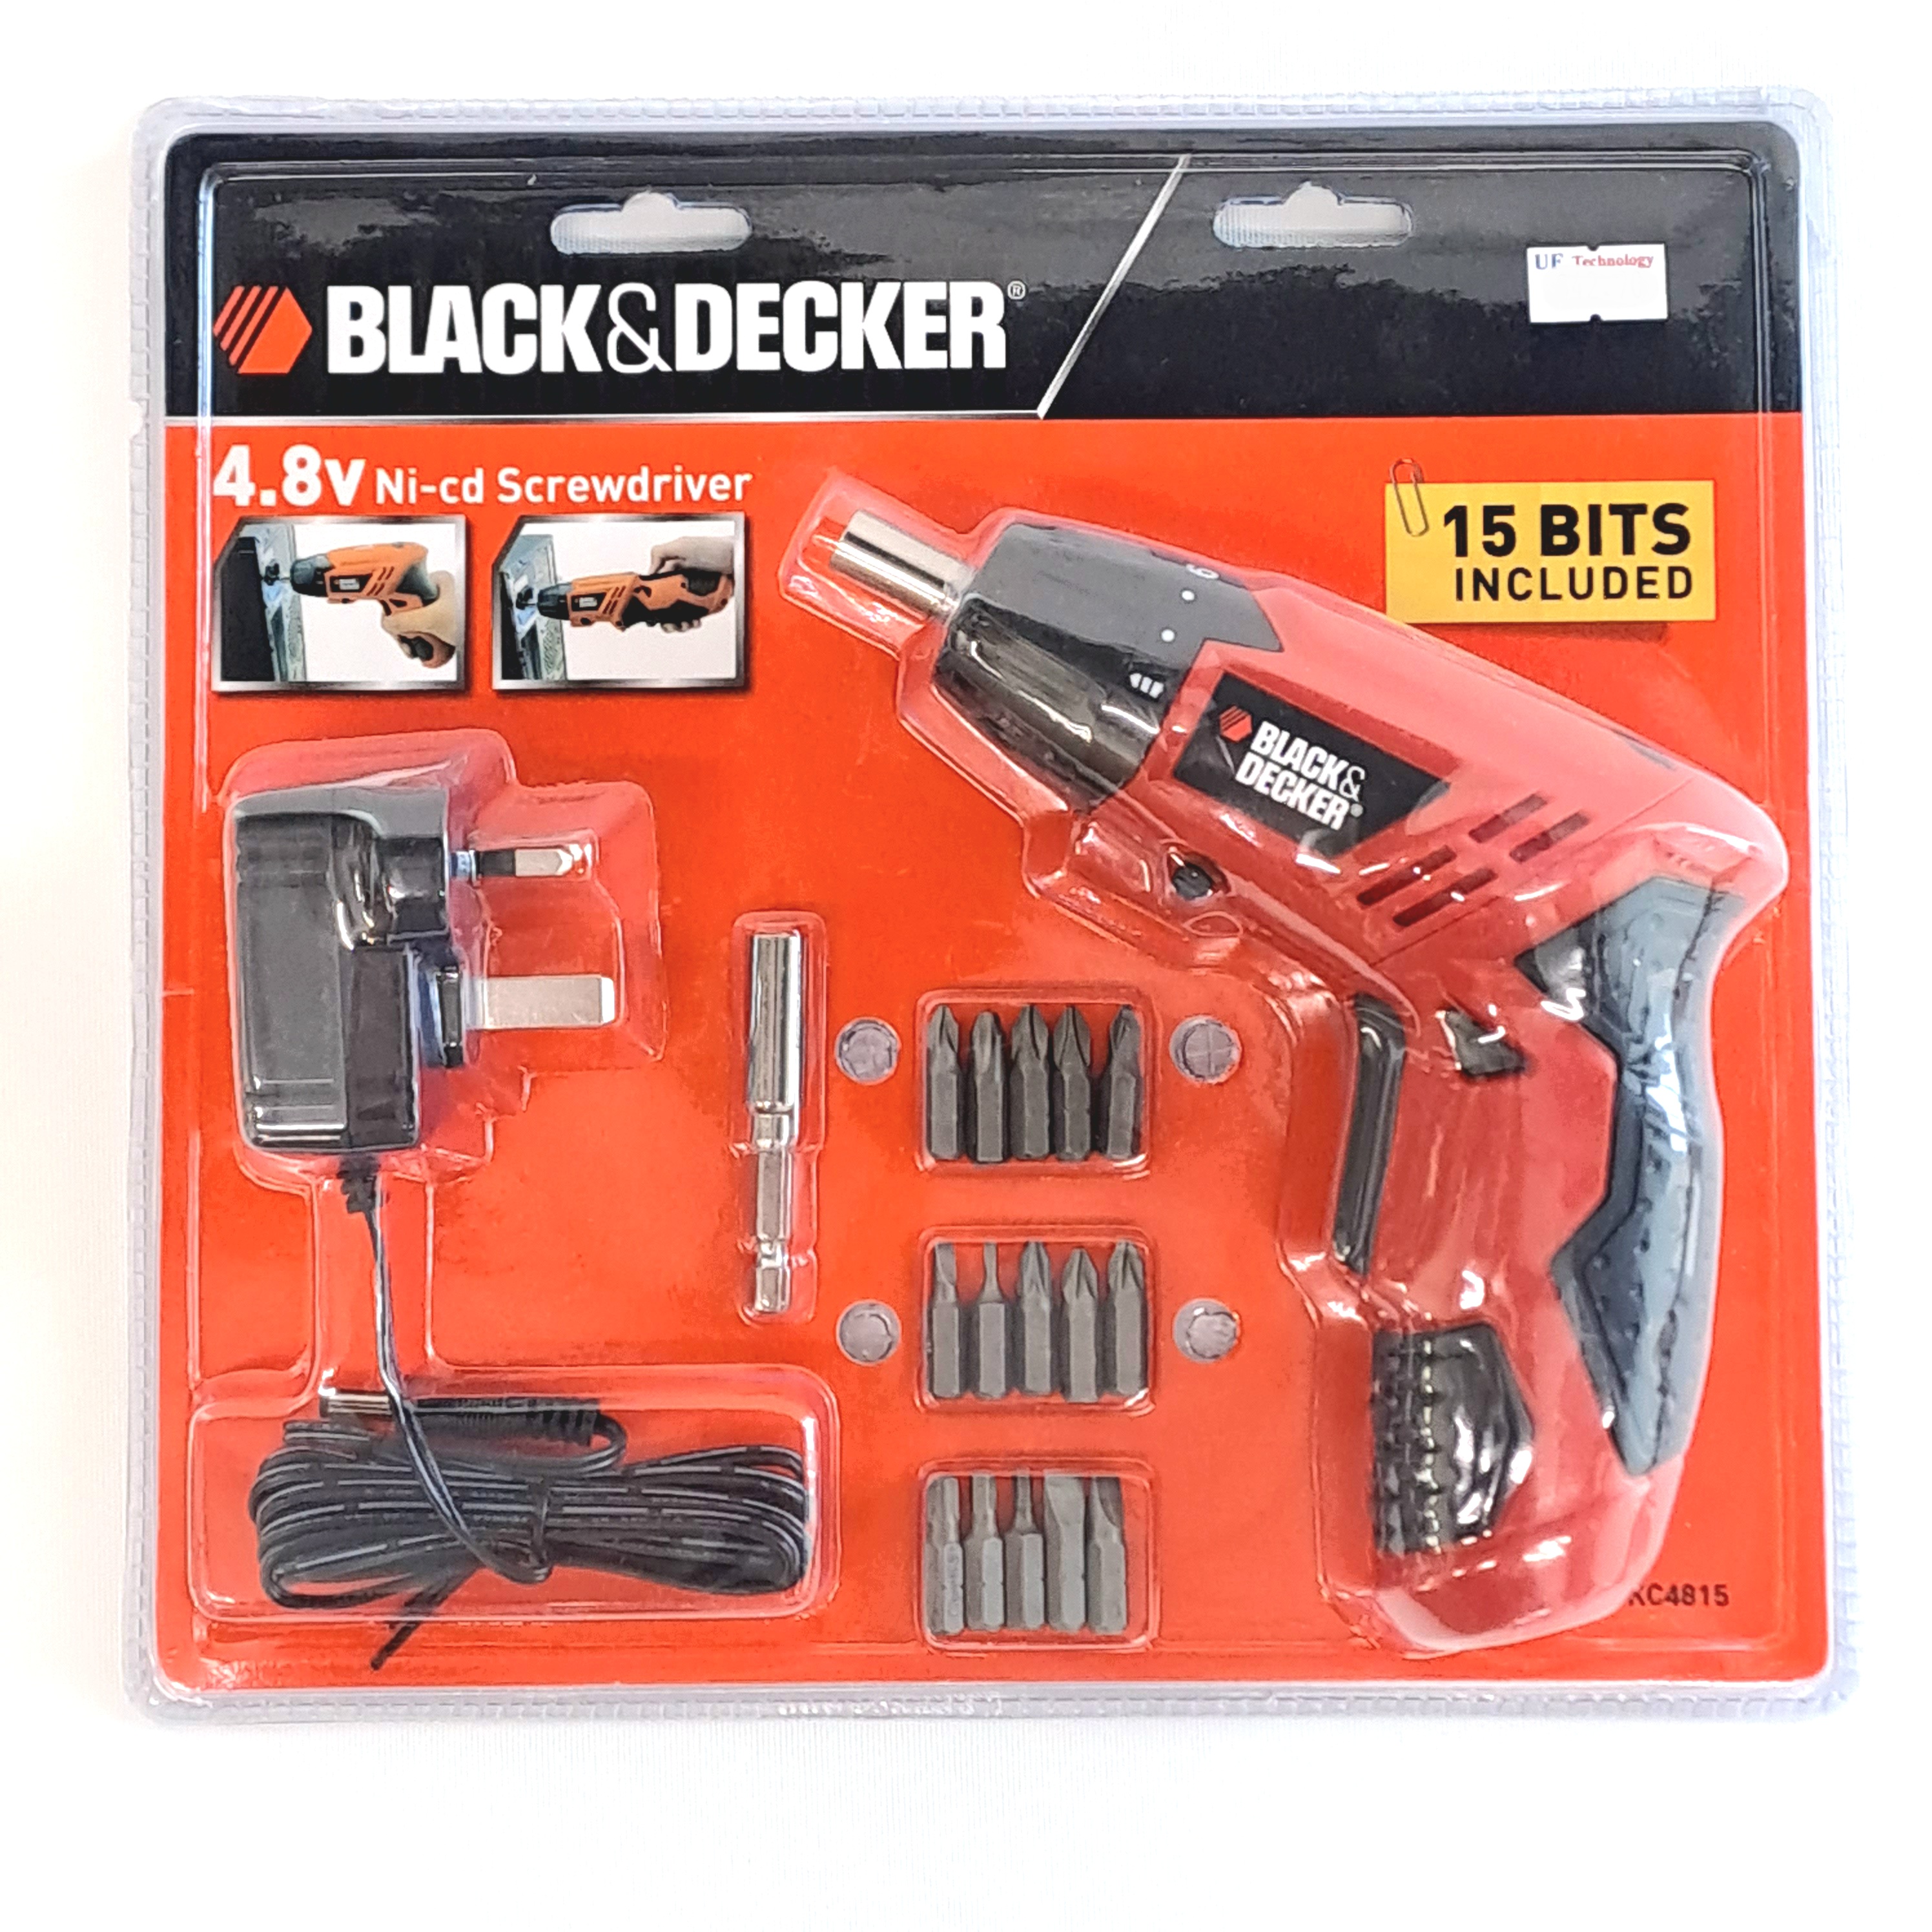 Black & Decker 4.8V NI-CD 600mAh Cordless Screw Driver (with safety mark power adapter) (75379)